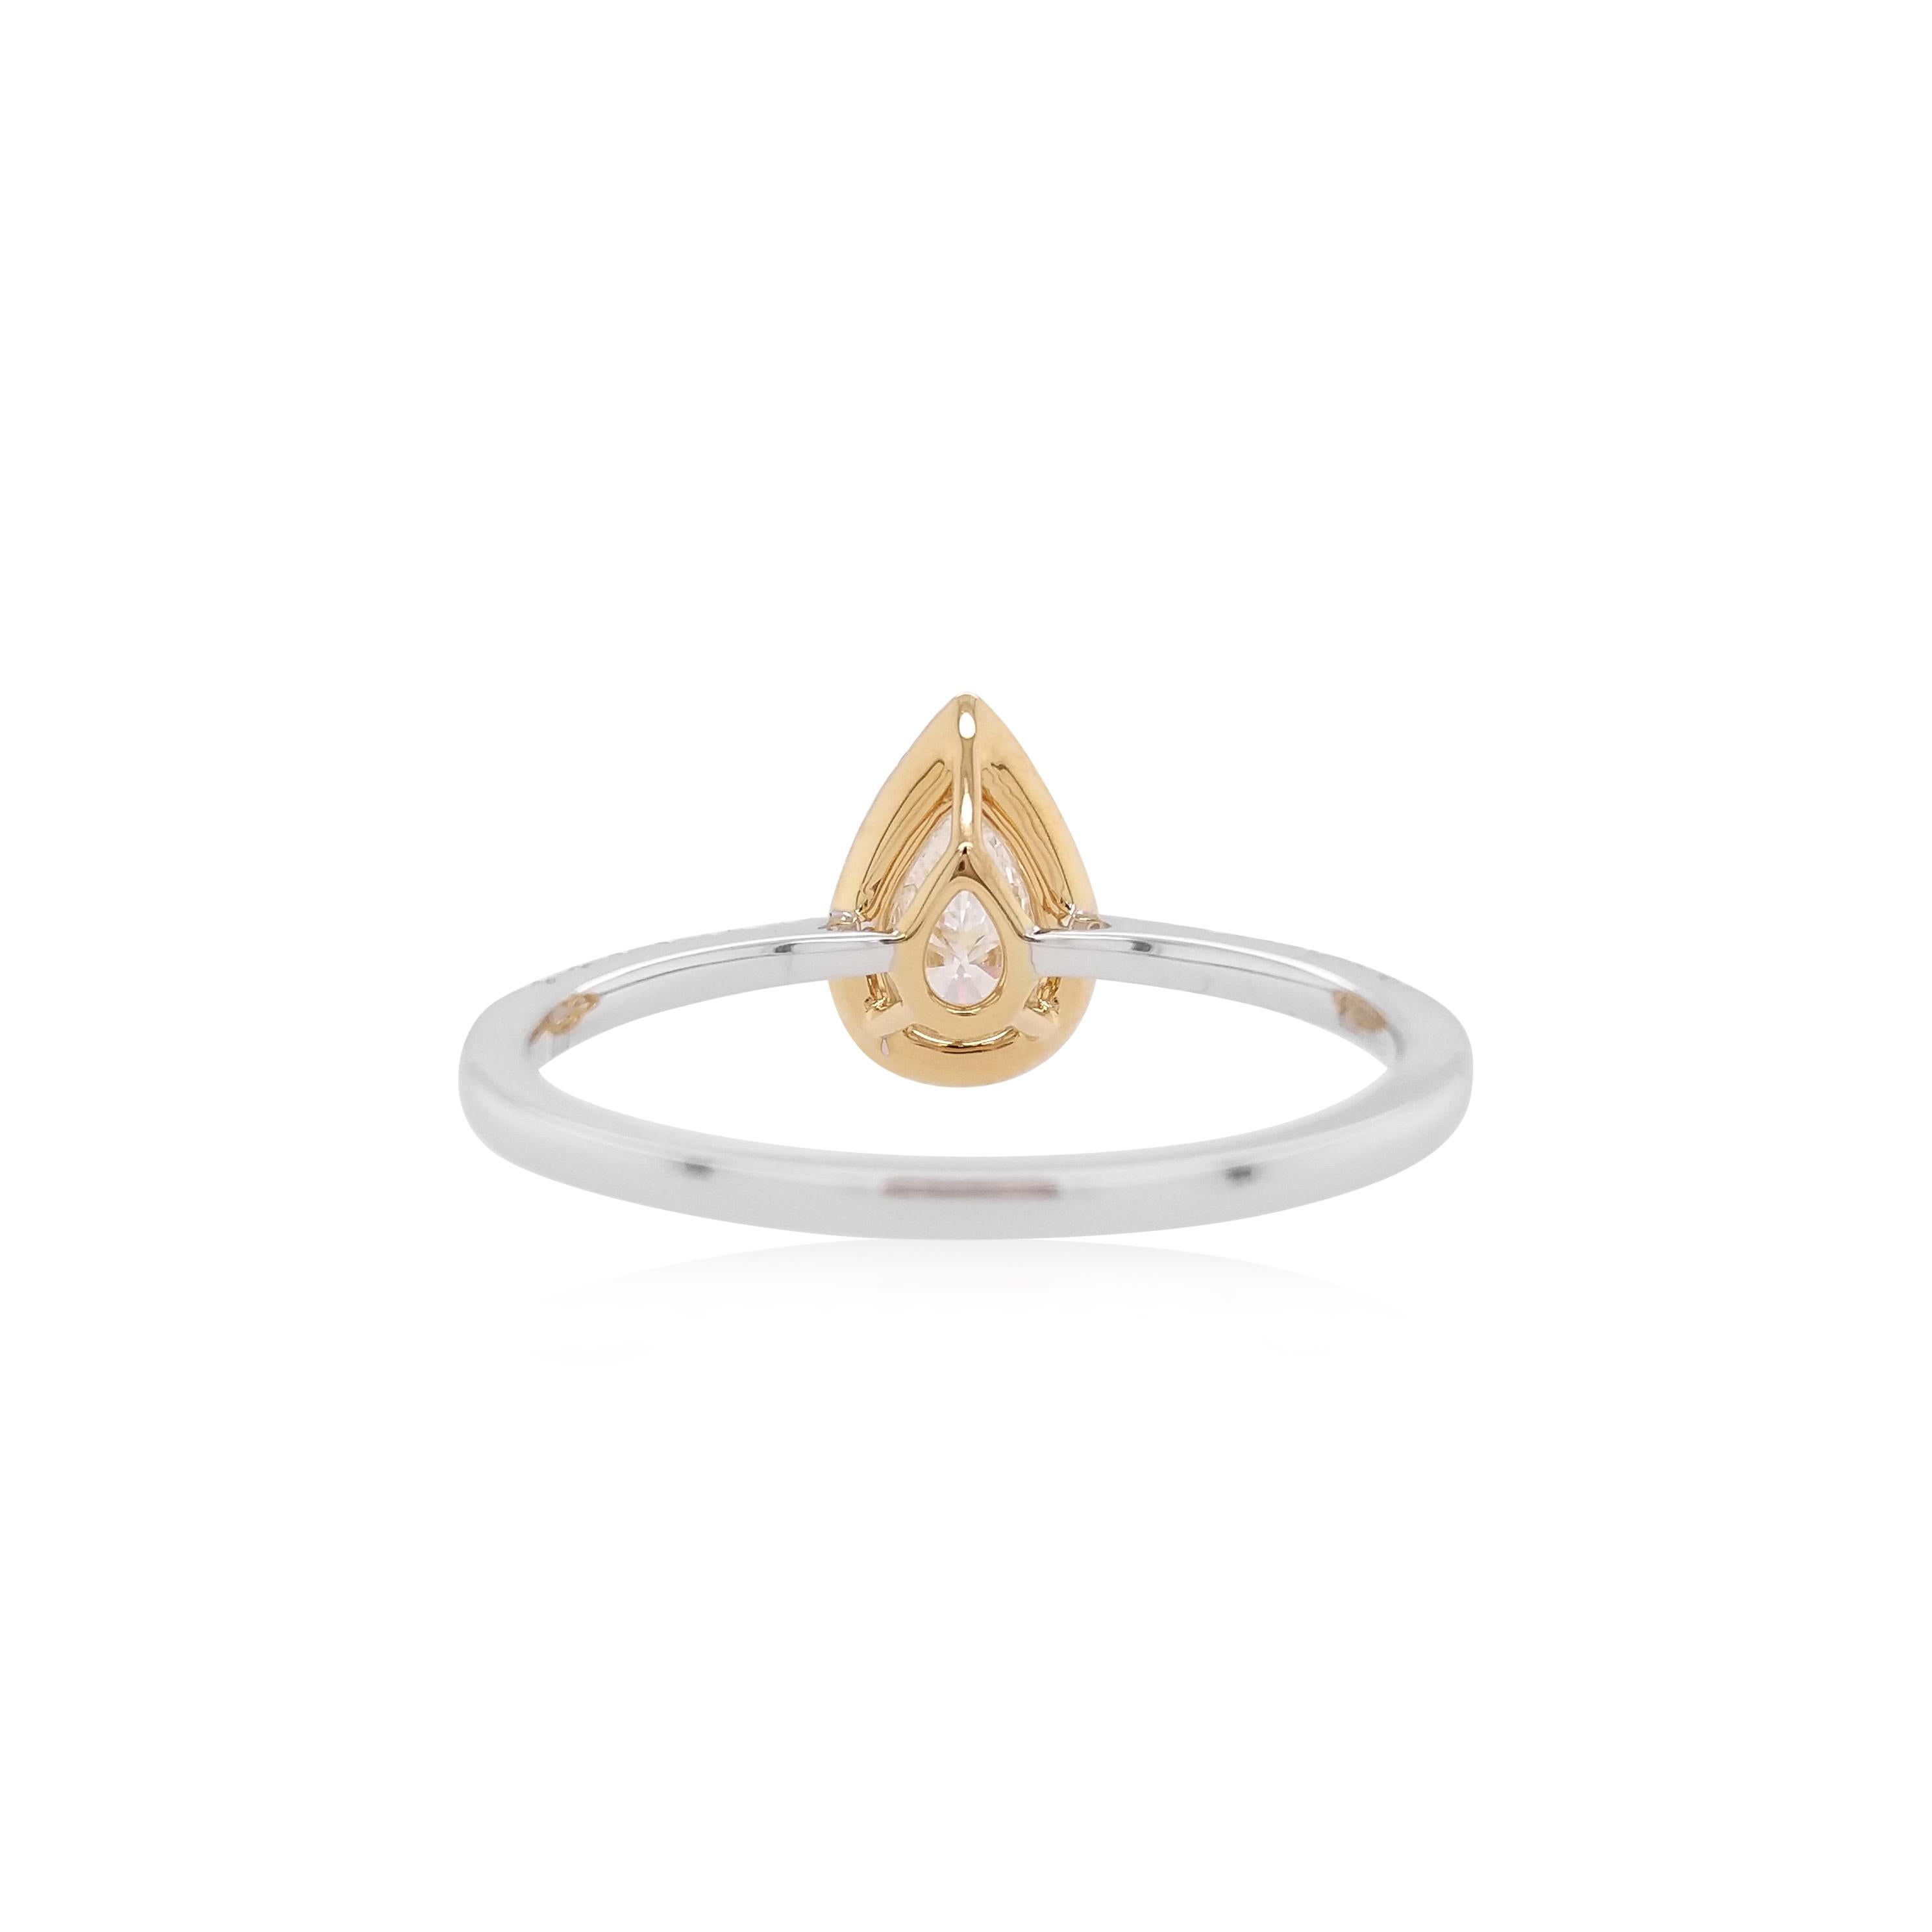 This gorgeous ring features an exceptional white diamond as its focal point, which has been hand-selected by our experts. Surrounded by a halo of orange diamonds and encased in a bold 18 Karat white and yellow gold setting, the ring has been